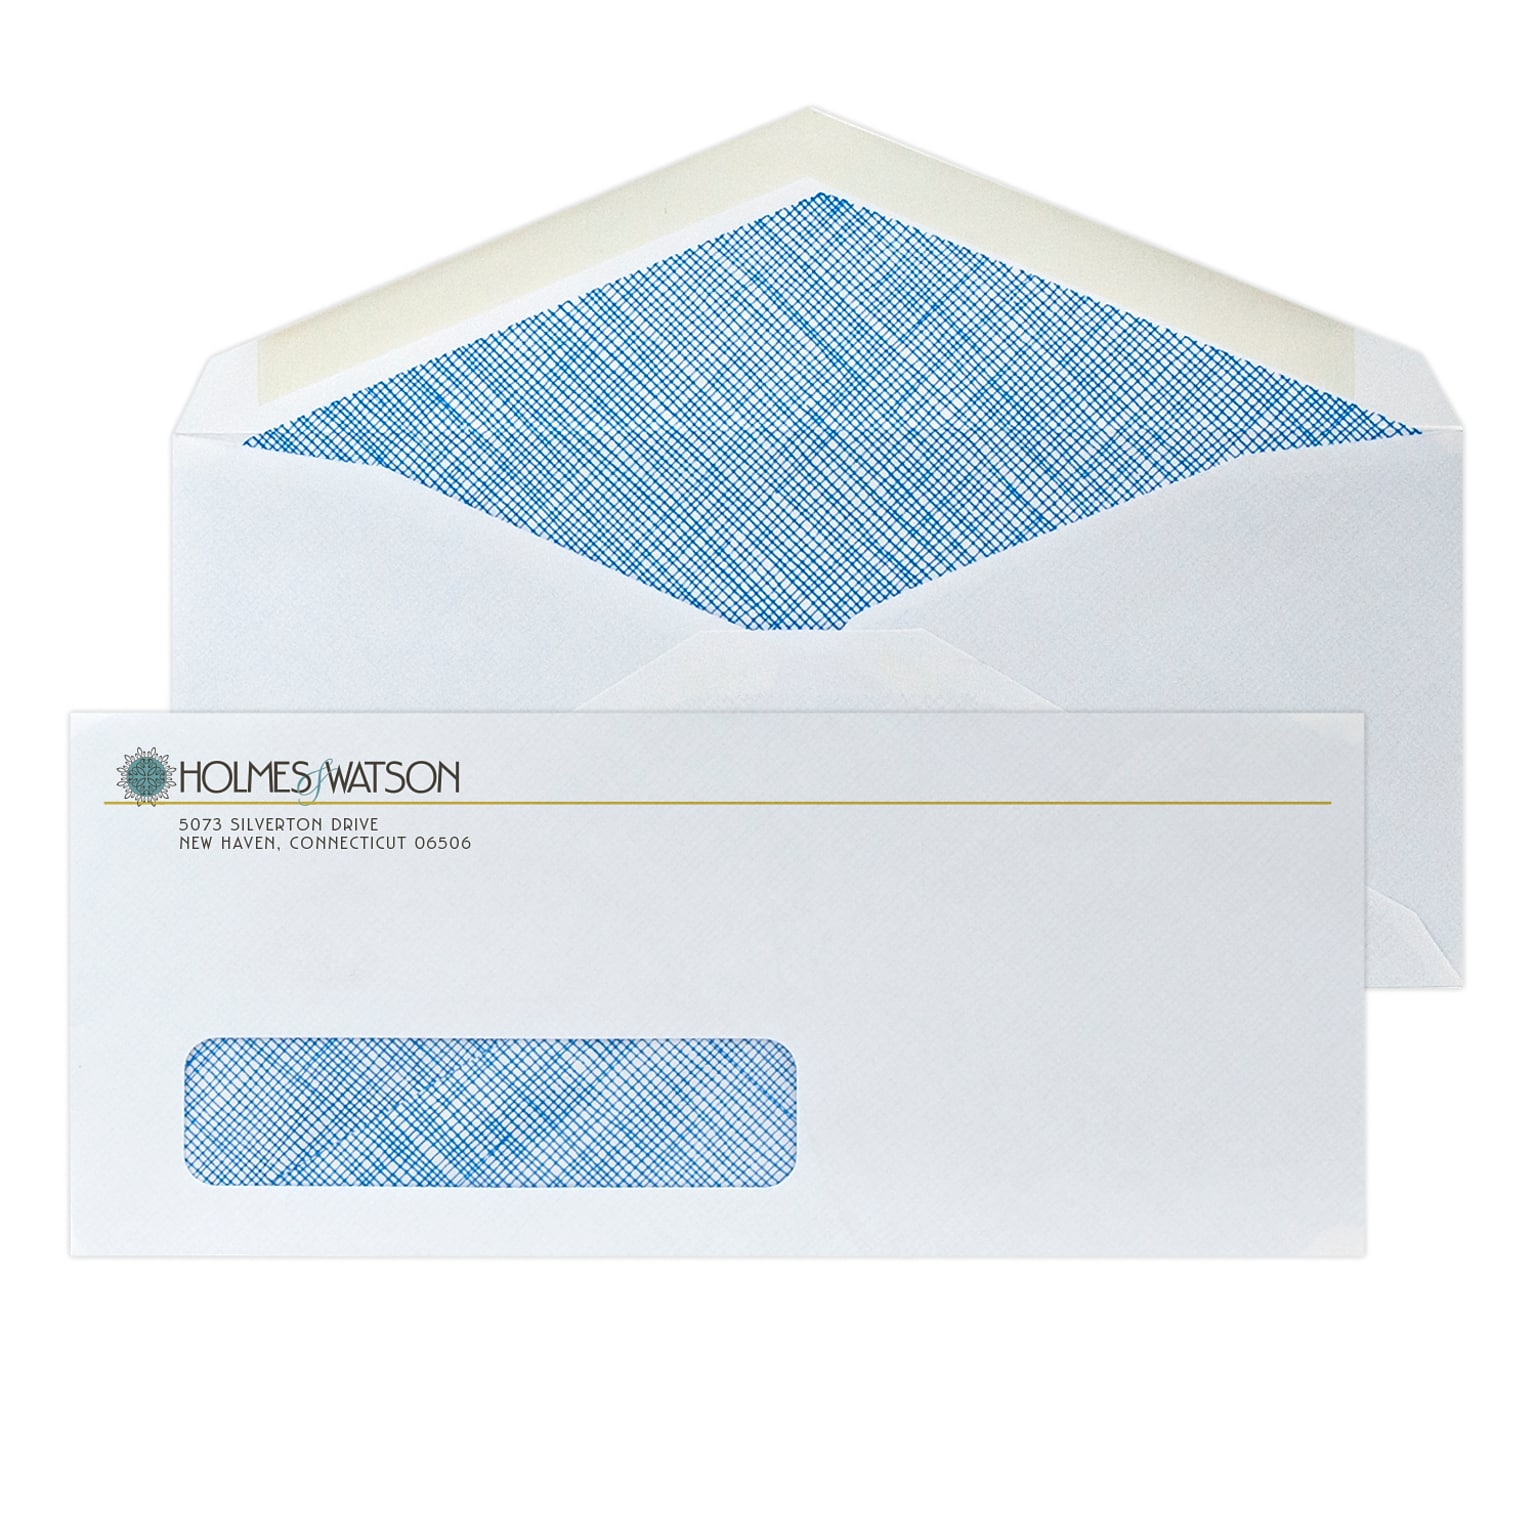 Custom Full Color #10 Window Envelopes with Security Tint and V-Flap, 4 1/4 x 9 1/2, 24# White Wove, 250 / Pack